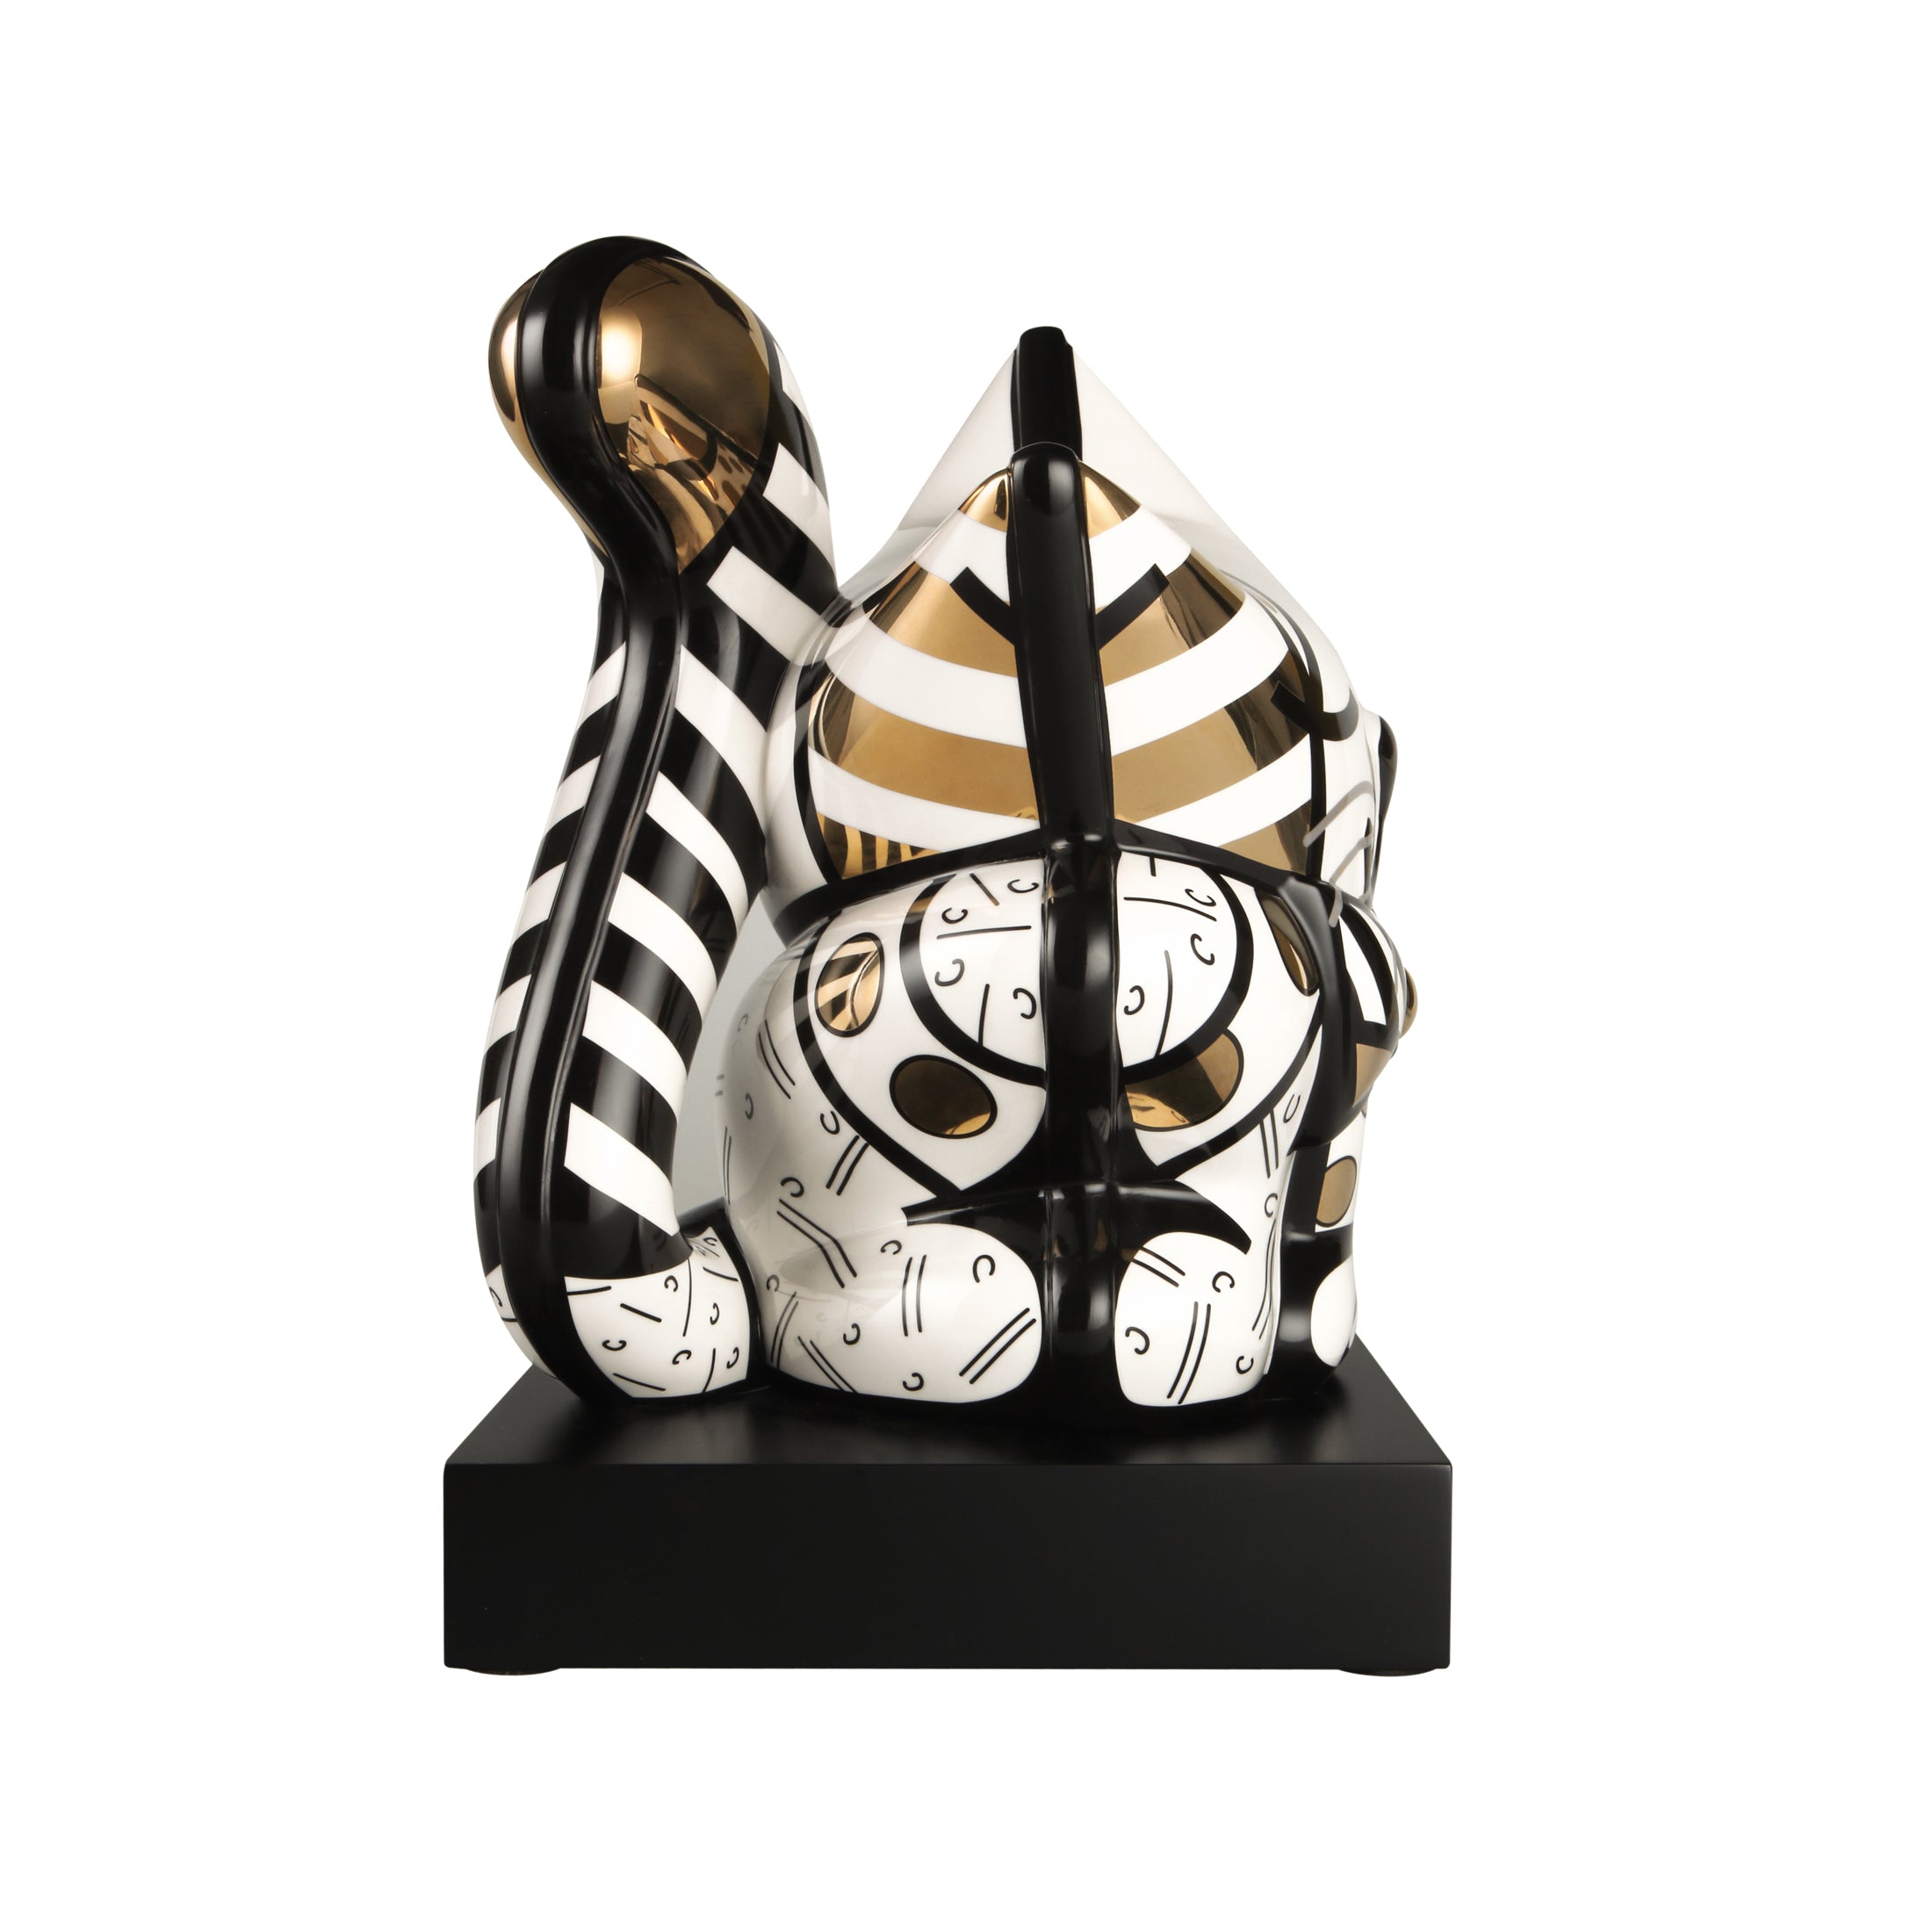 Goebel by Britto Figur "Golden Cat" (limited edition)